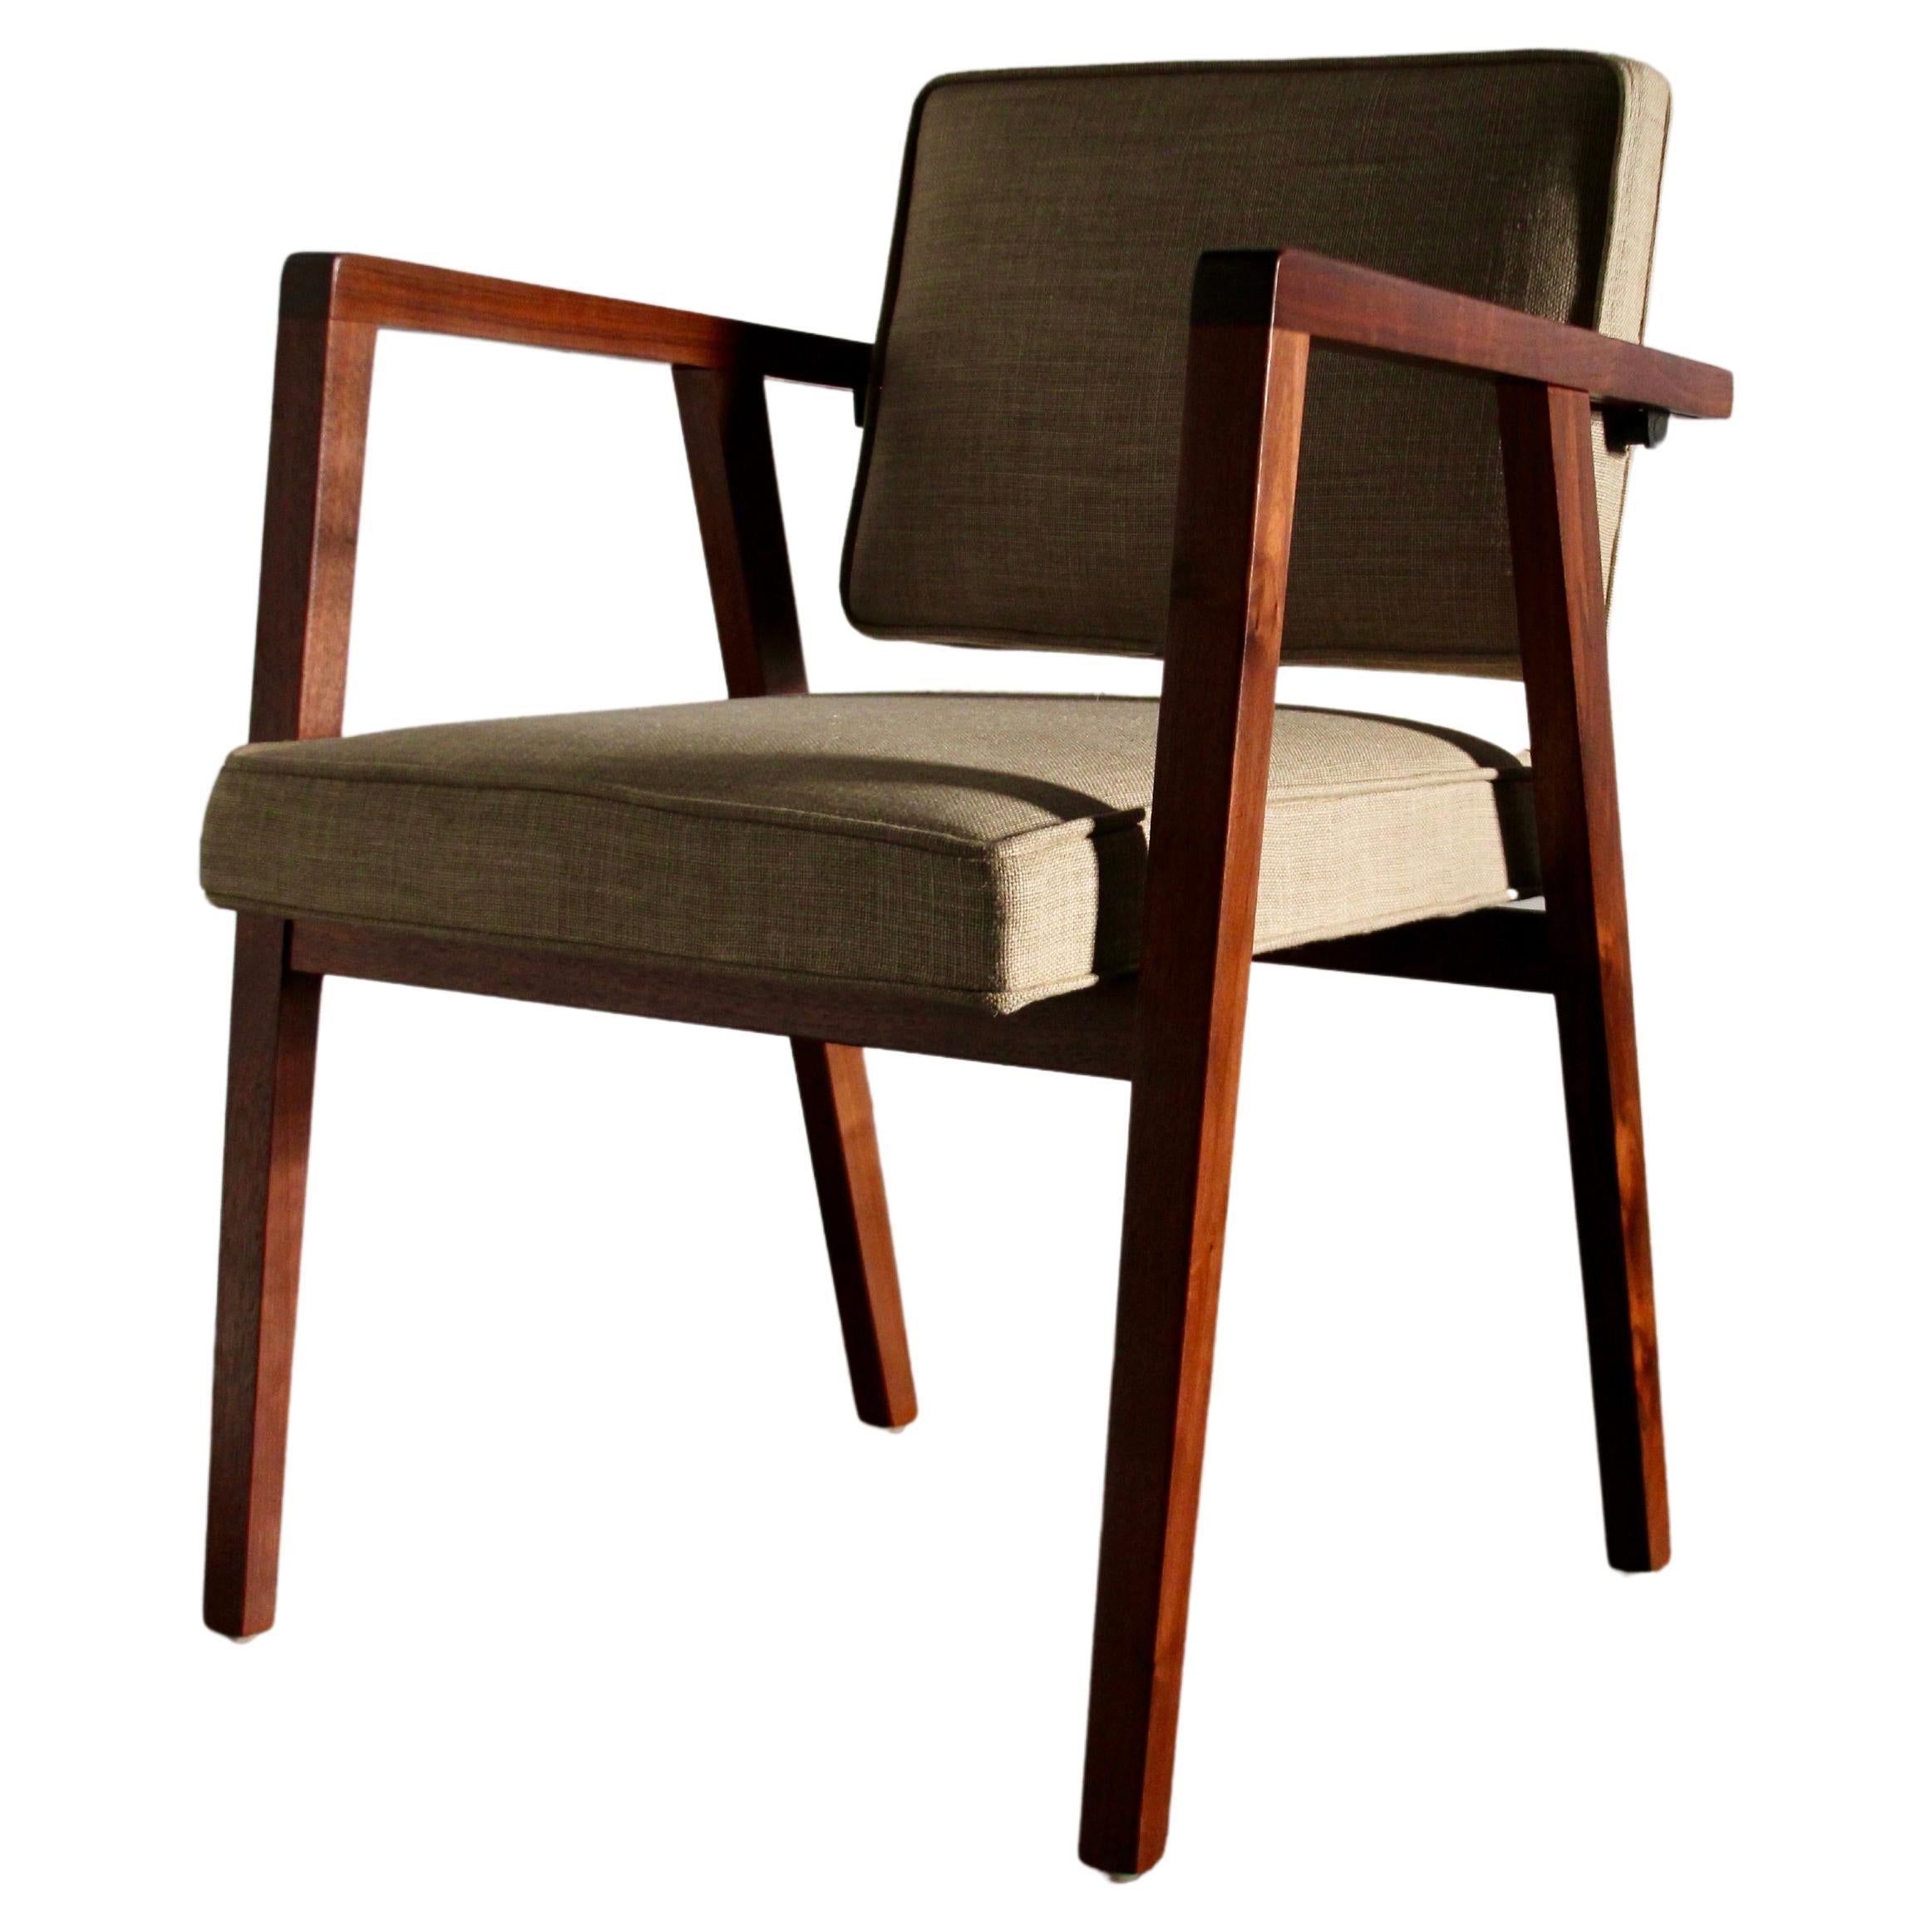 Early Franco Albini for Knoll 'No. 48' Walnut and Linen Accent Chair, 1949